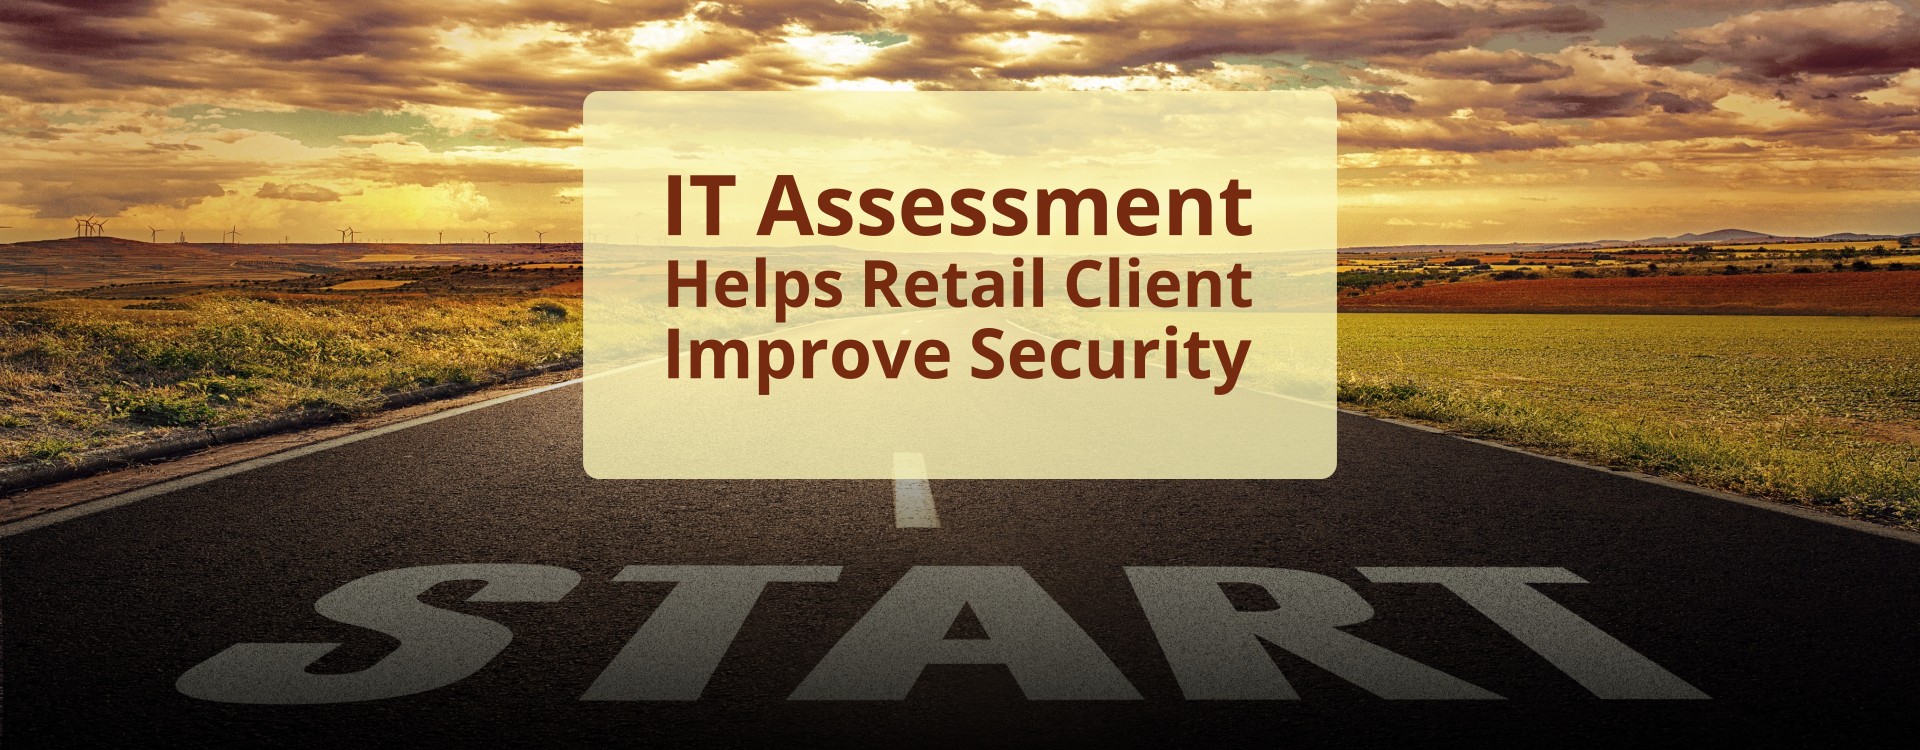 IT assessment helps retail client improve security banner